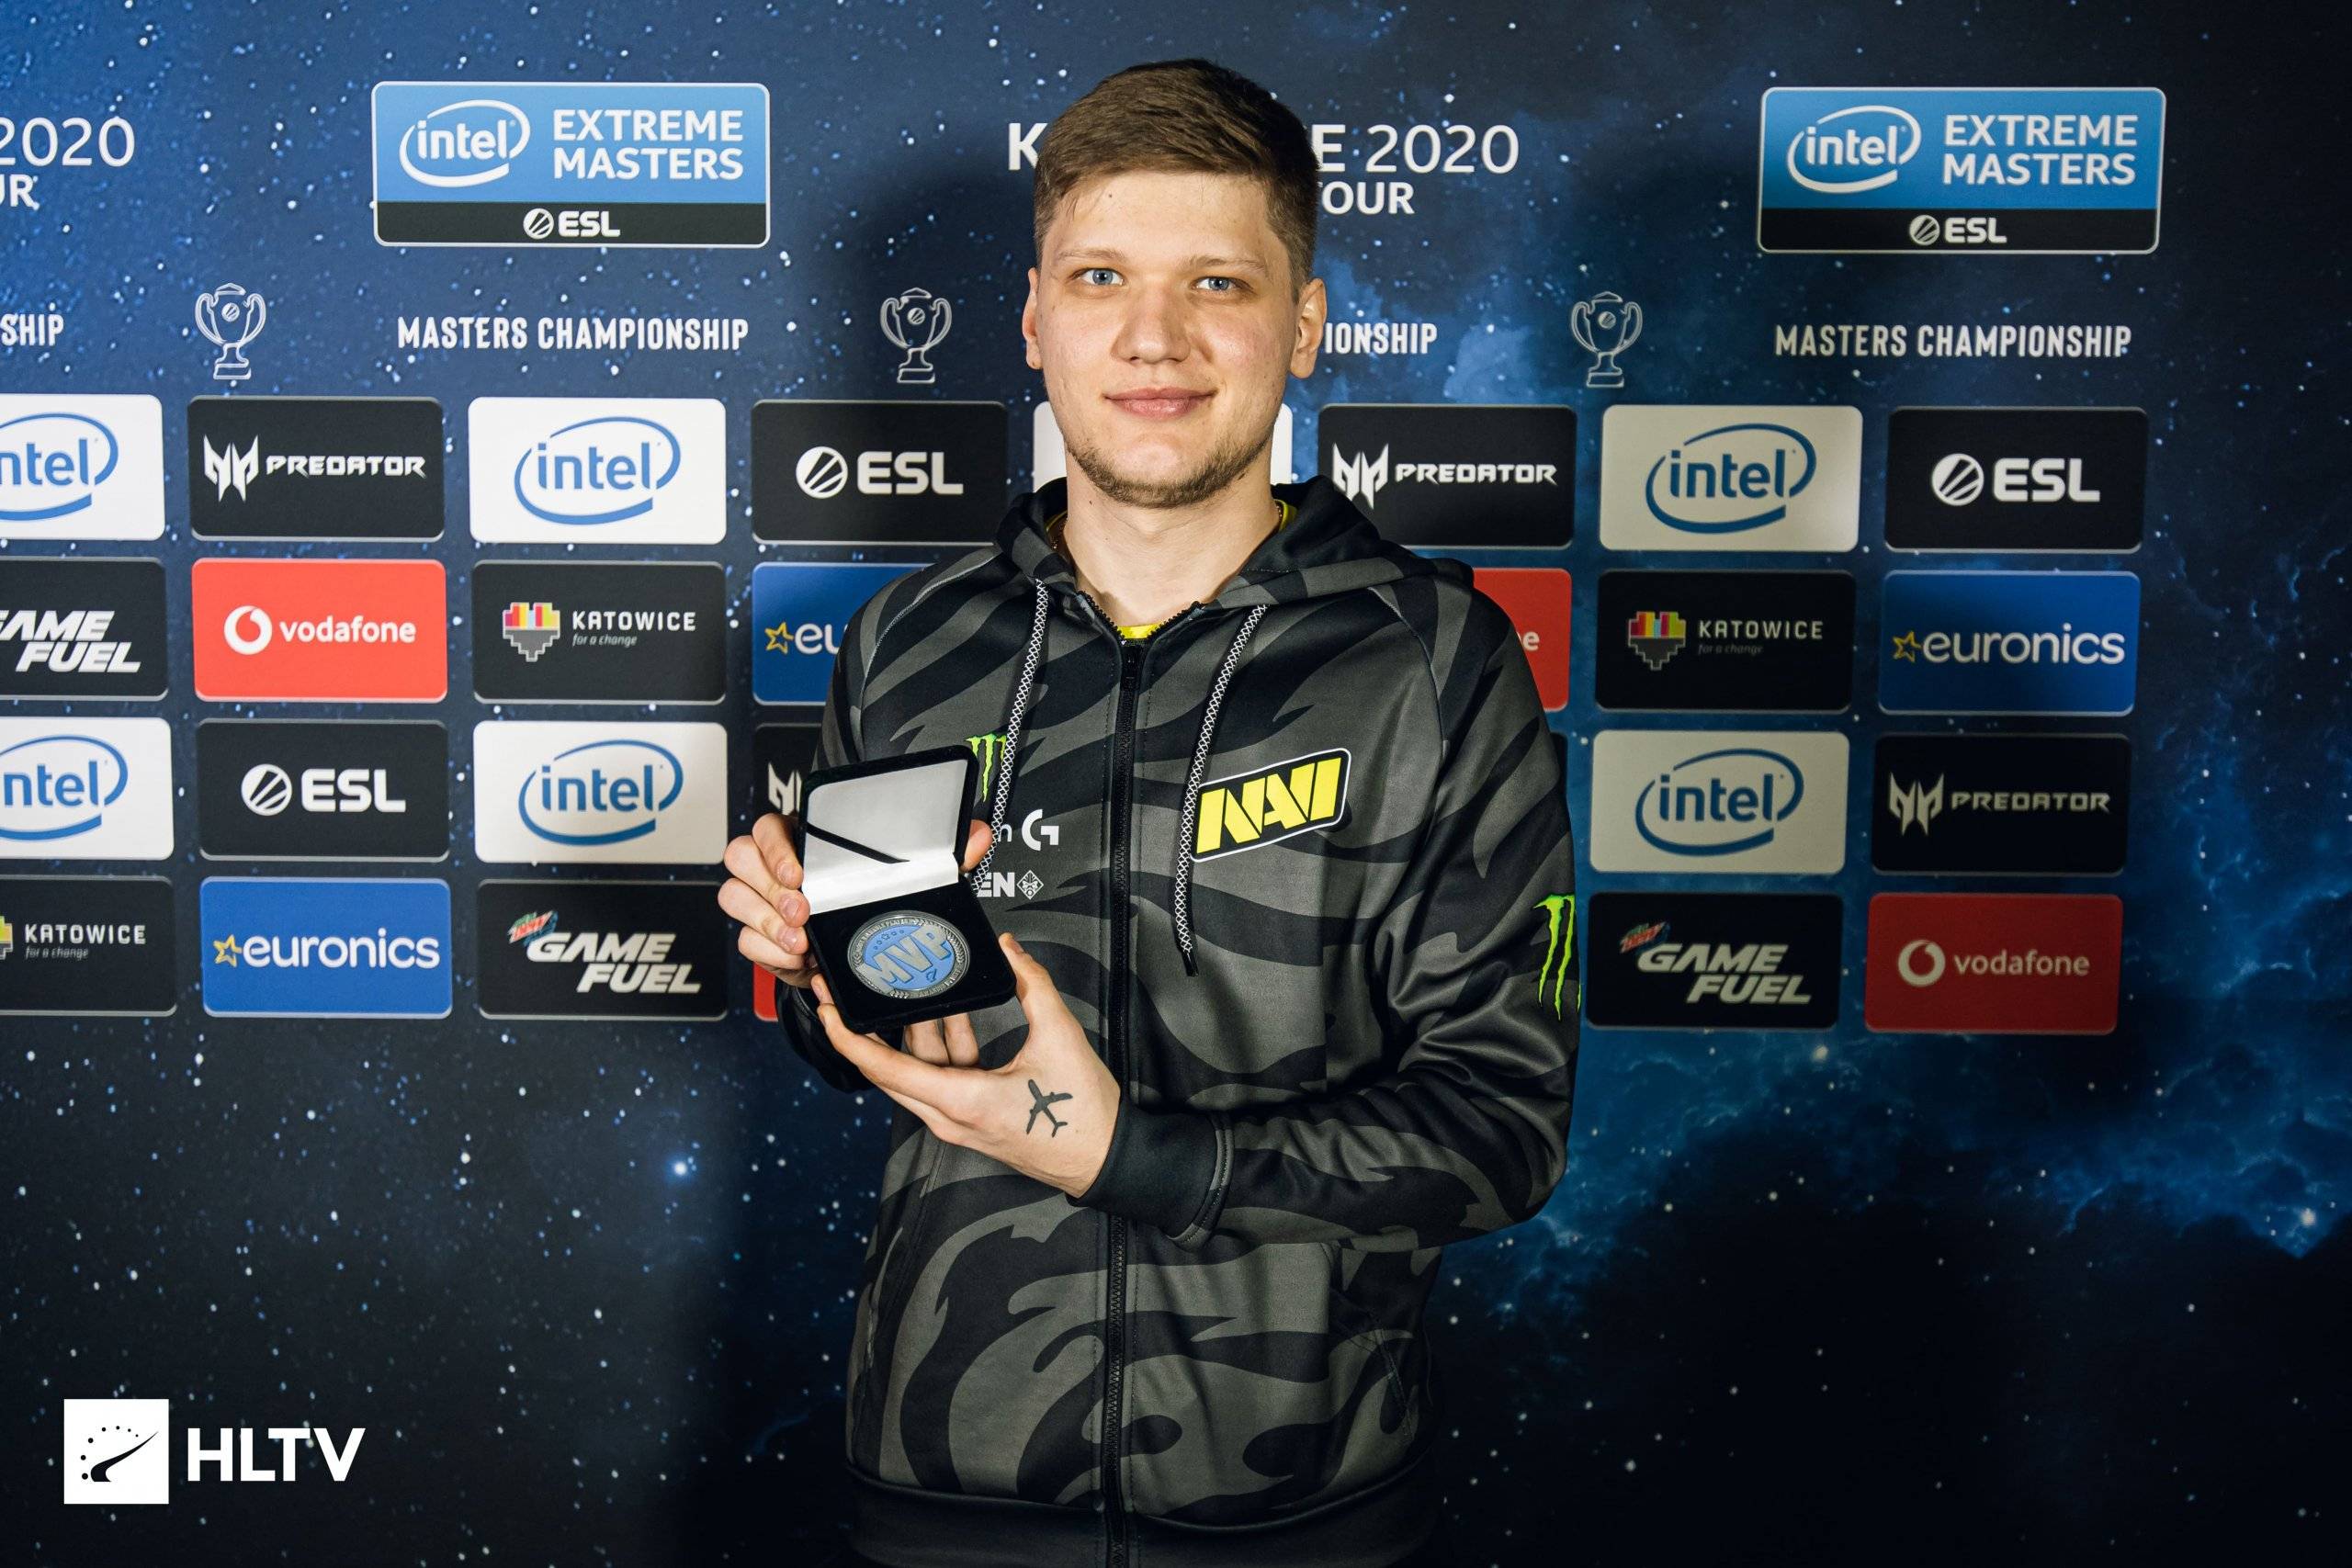 s1mple scaled